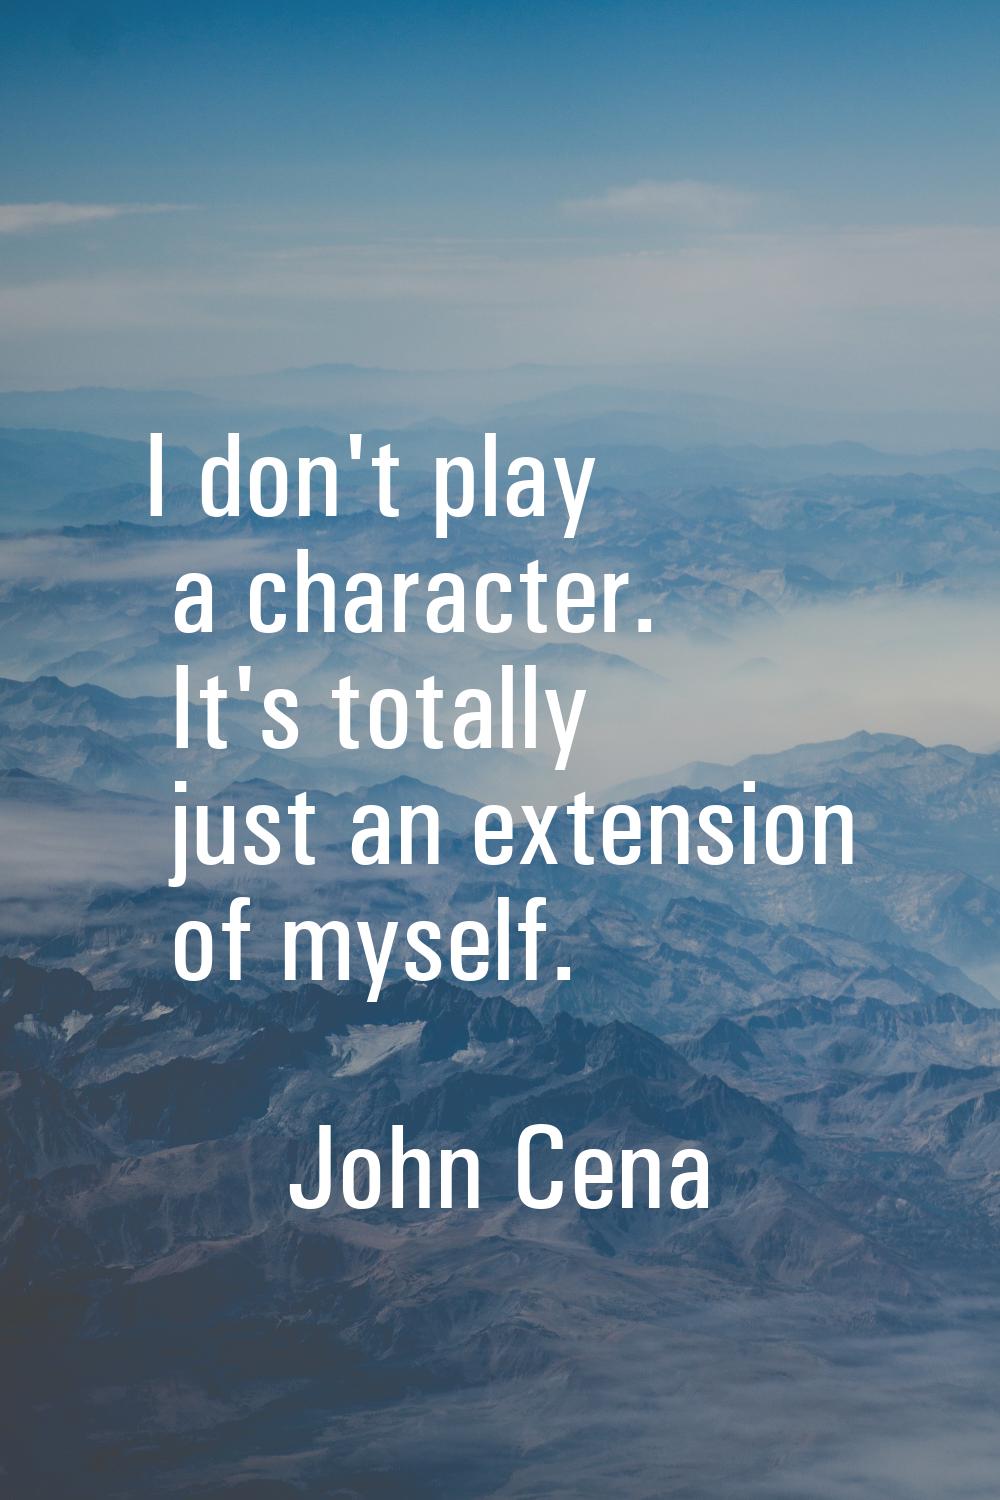 I don't play a character. It's totally just an extension of myself.